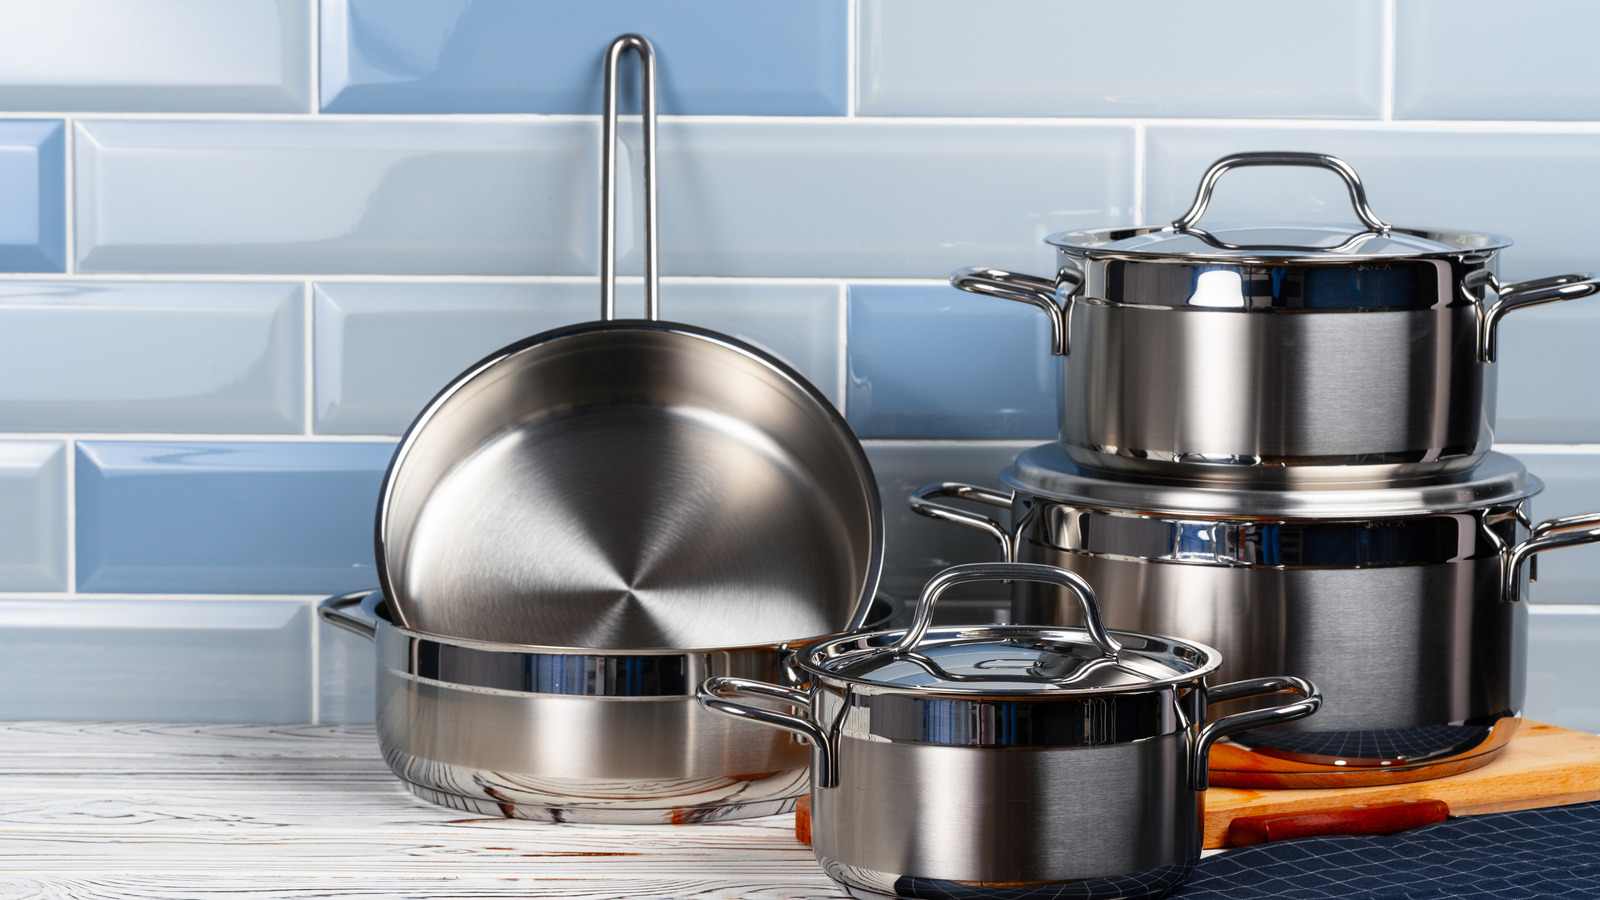 https://www.thedailymeal.com/img/gallery/19-mistakes-to-avoid-with-stainless-steel-cookware/l-intro-1688398245.jpg